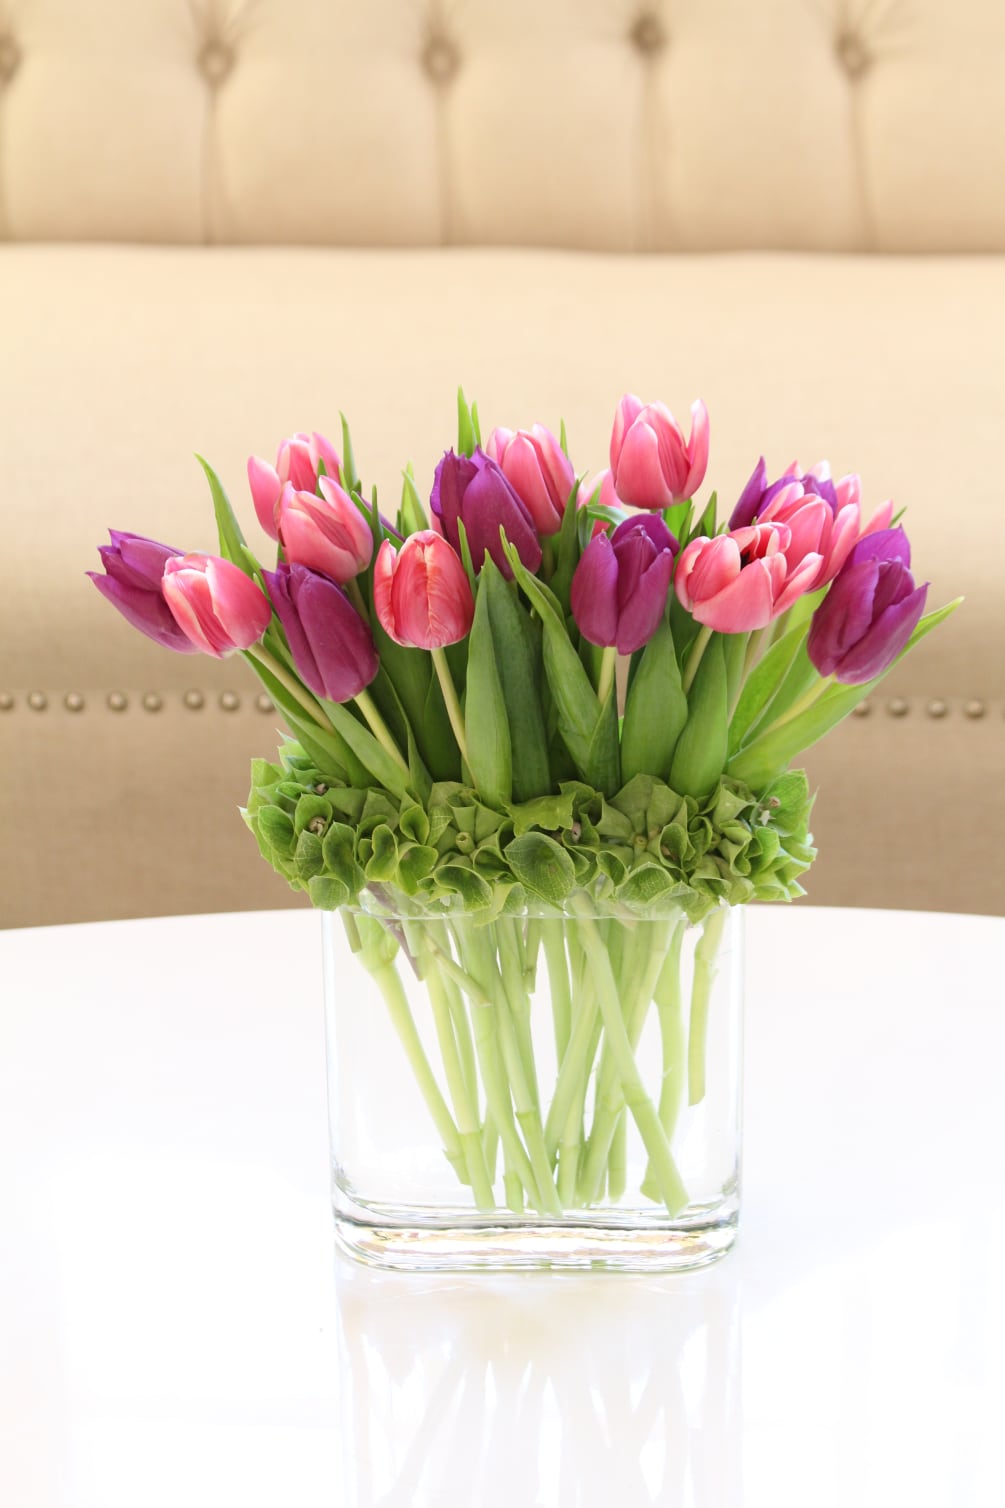 Modern style arrangement of assorted colored tulips accented with bells of Ireland.

Vase